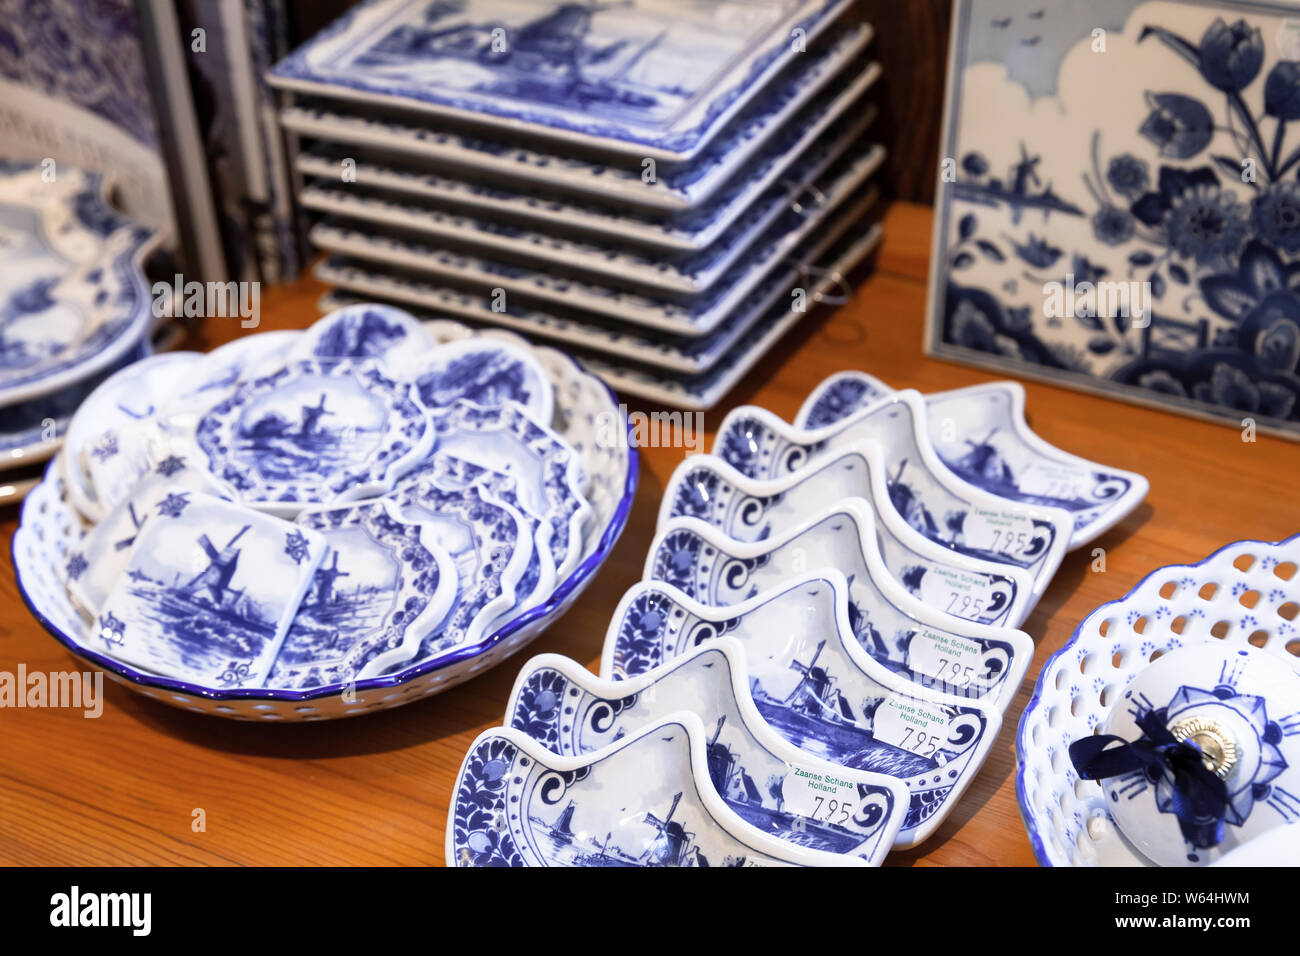 Zaanse Schans, Netherlands - February 25, 2017: White ceramic dishes with traditional blue Dutch paintings are on wooden counter in tourist souvenir s Stock Photo